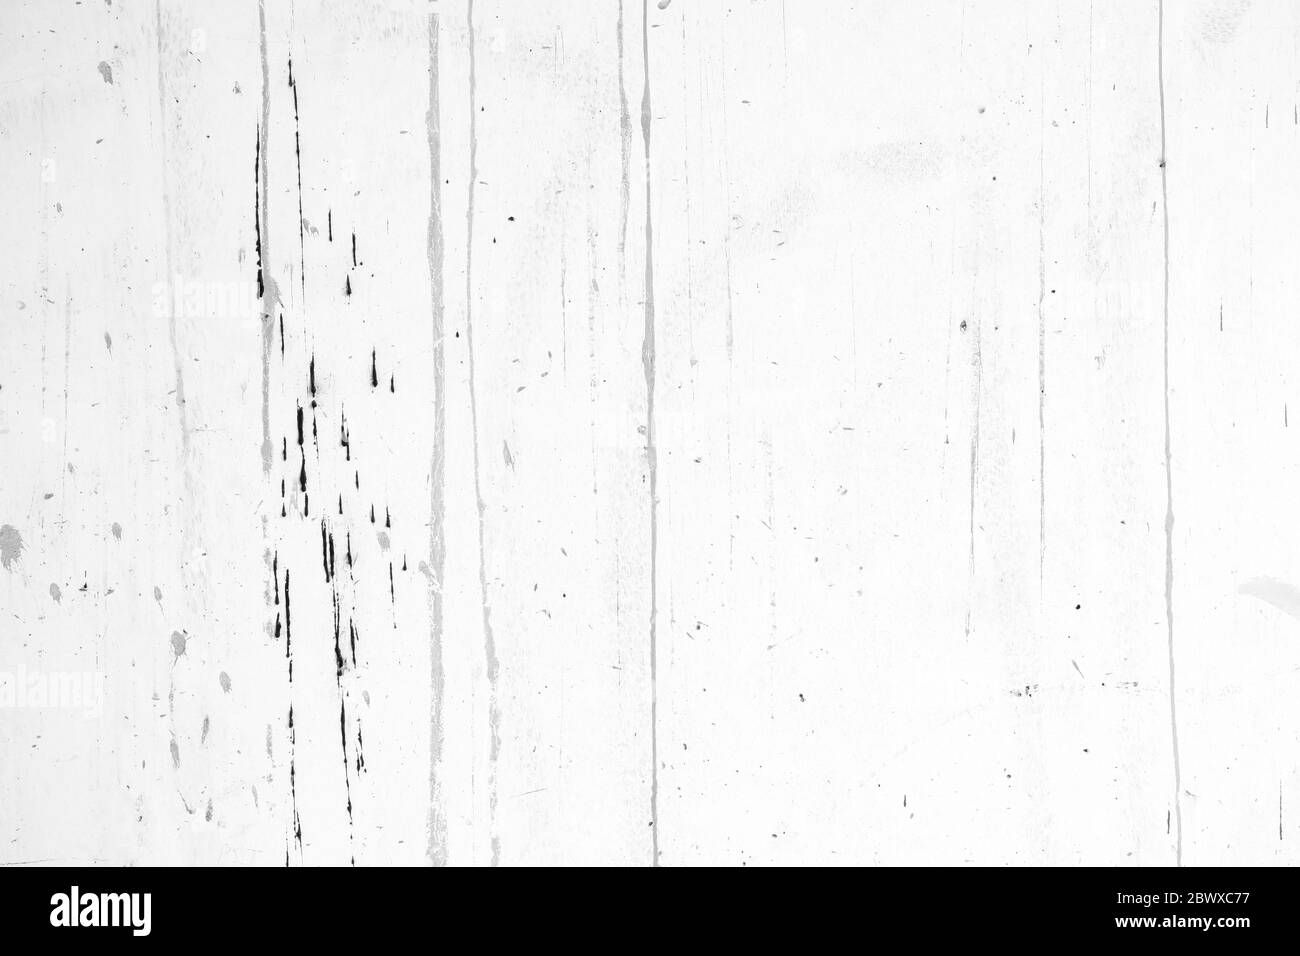 Water Stain on White Concrete Wall Texture Background. Stock Photo